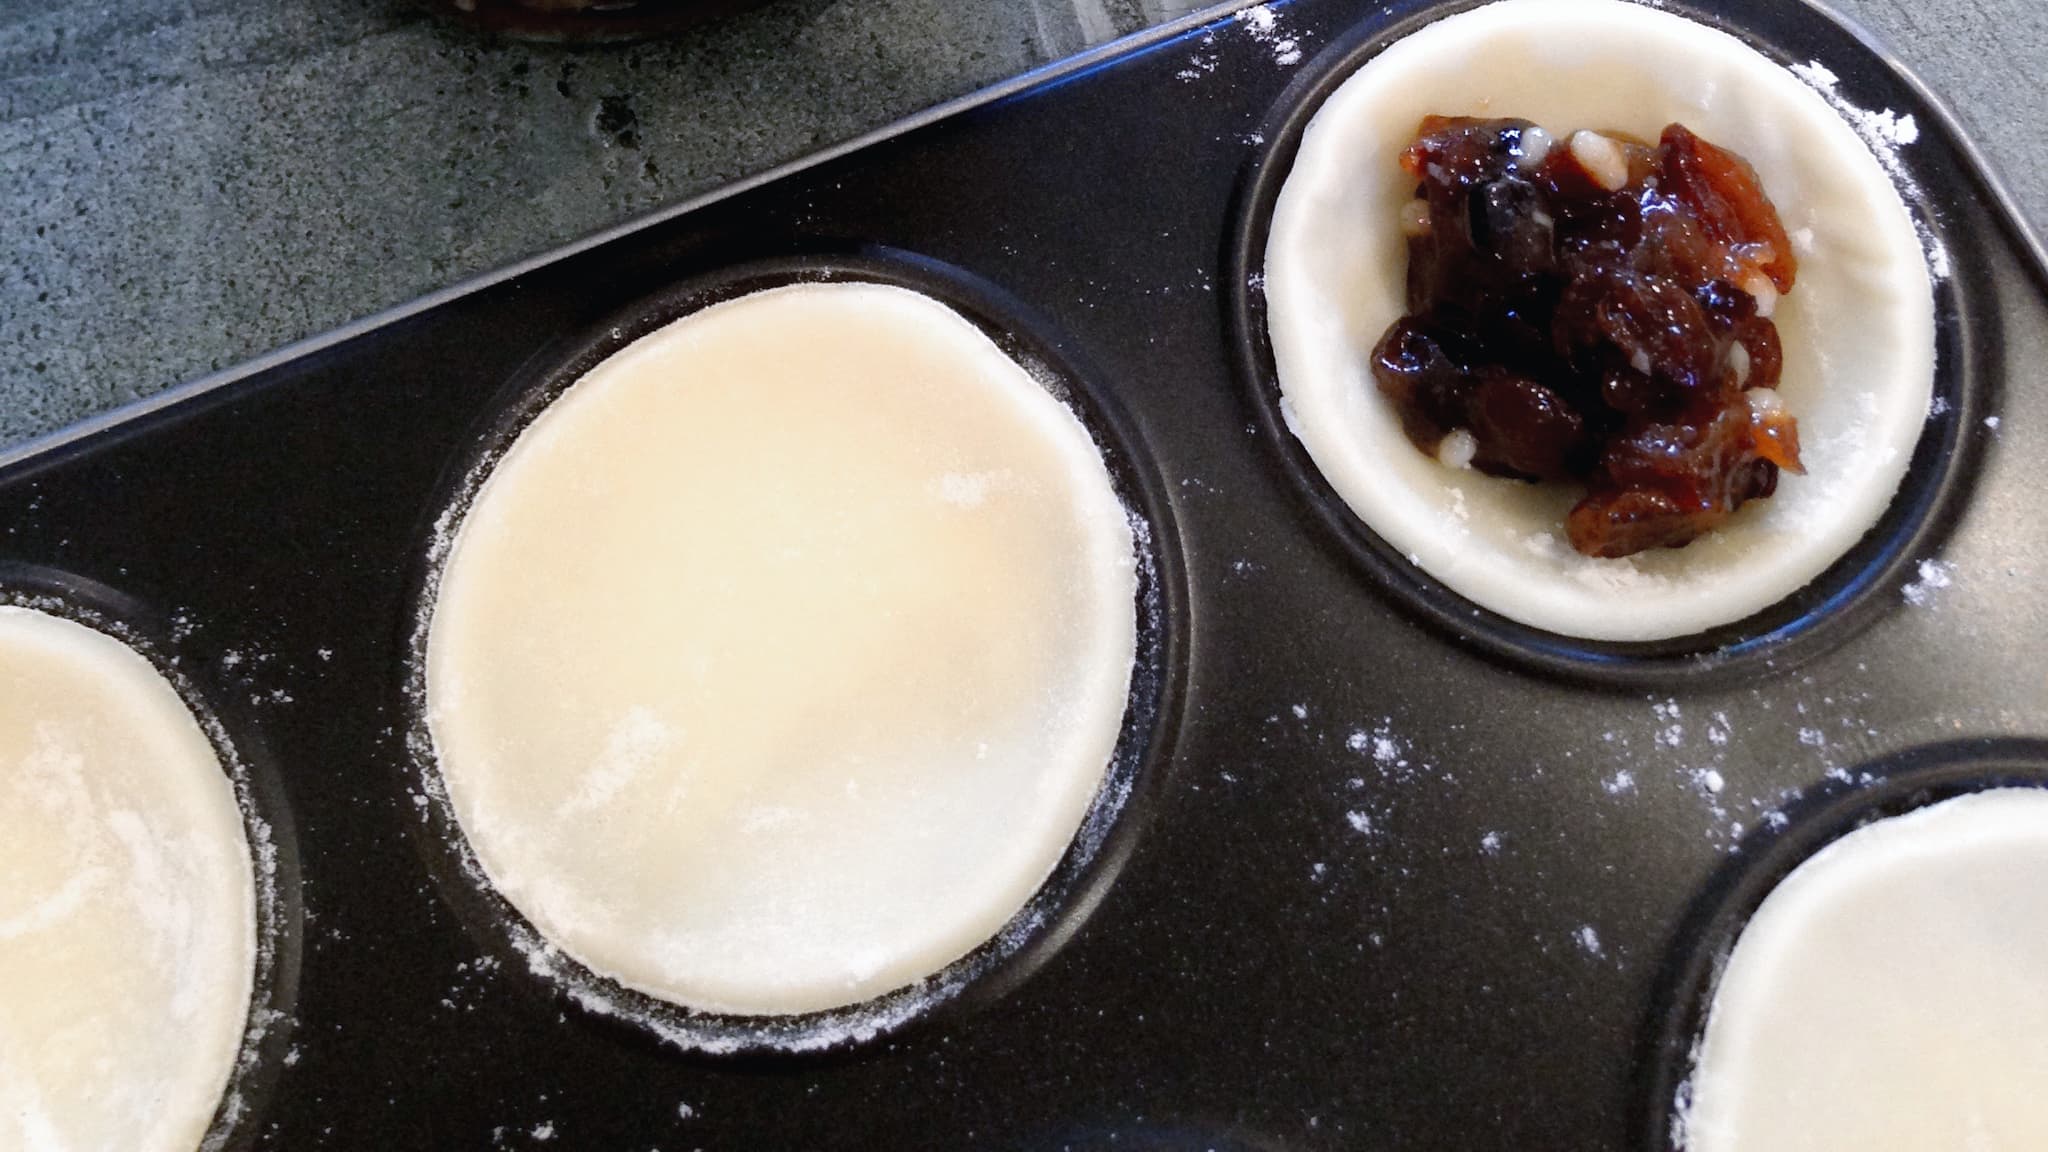 Fill each pastry base with mincemeat, leaving room at the top